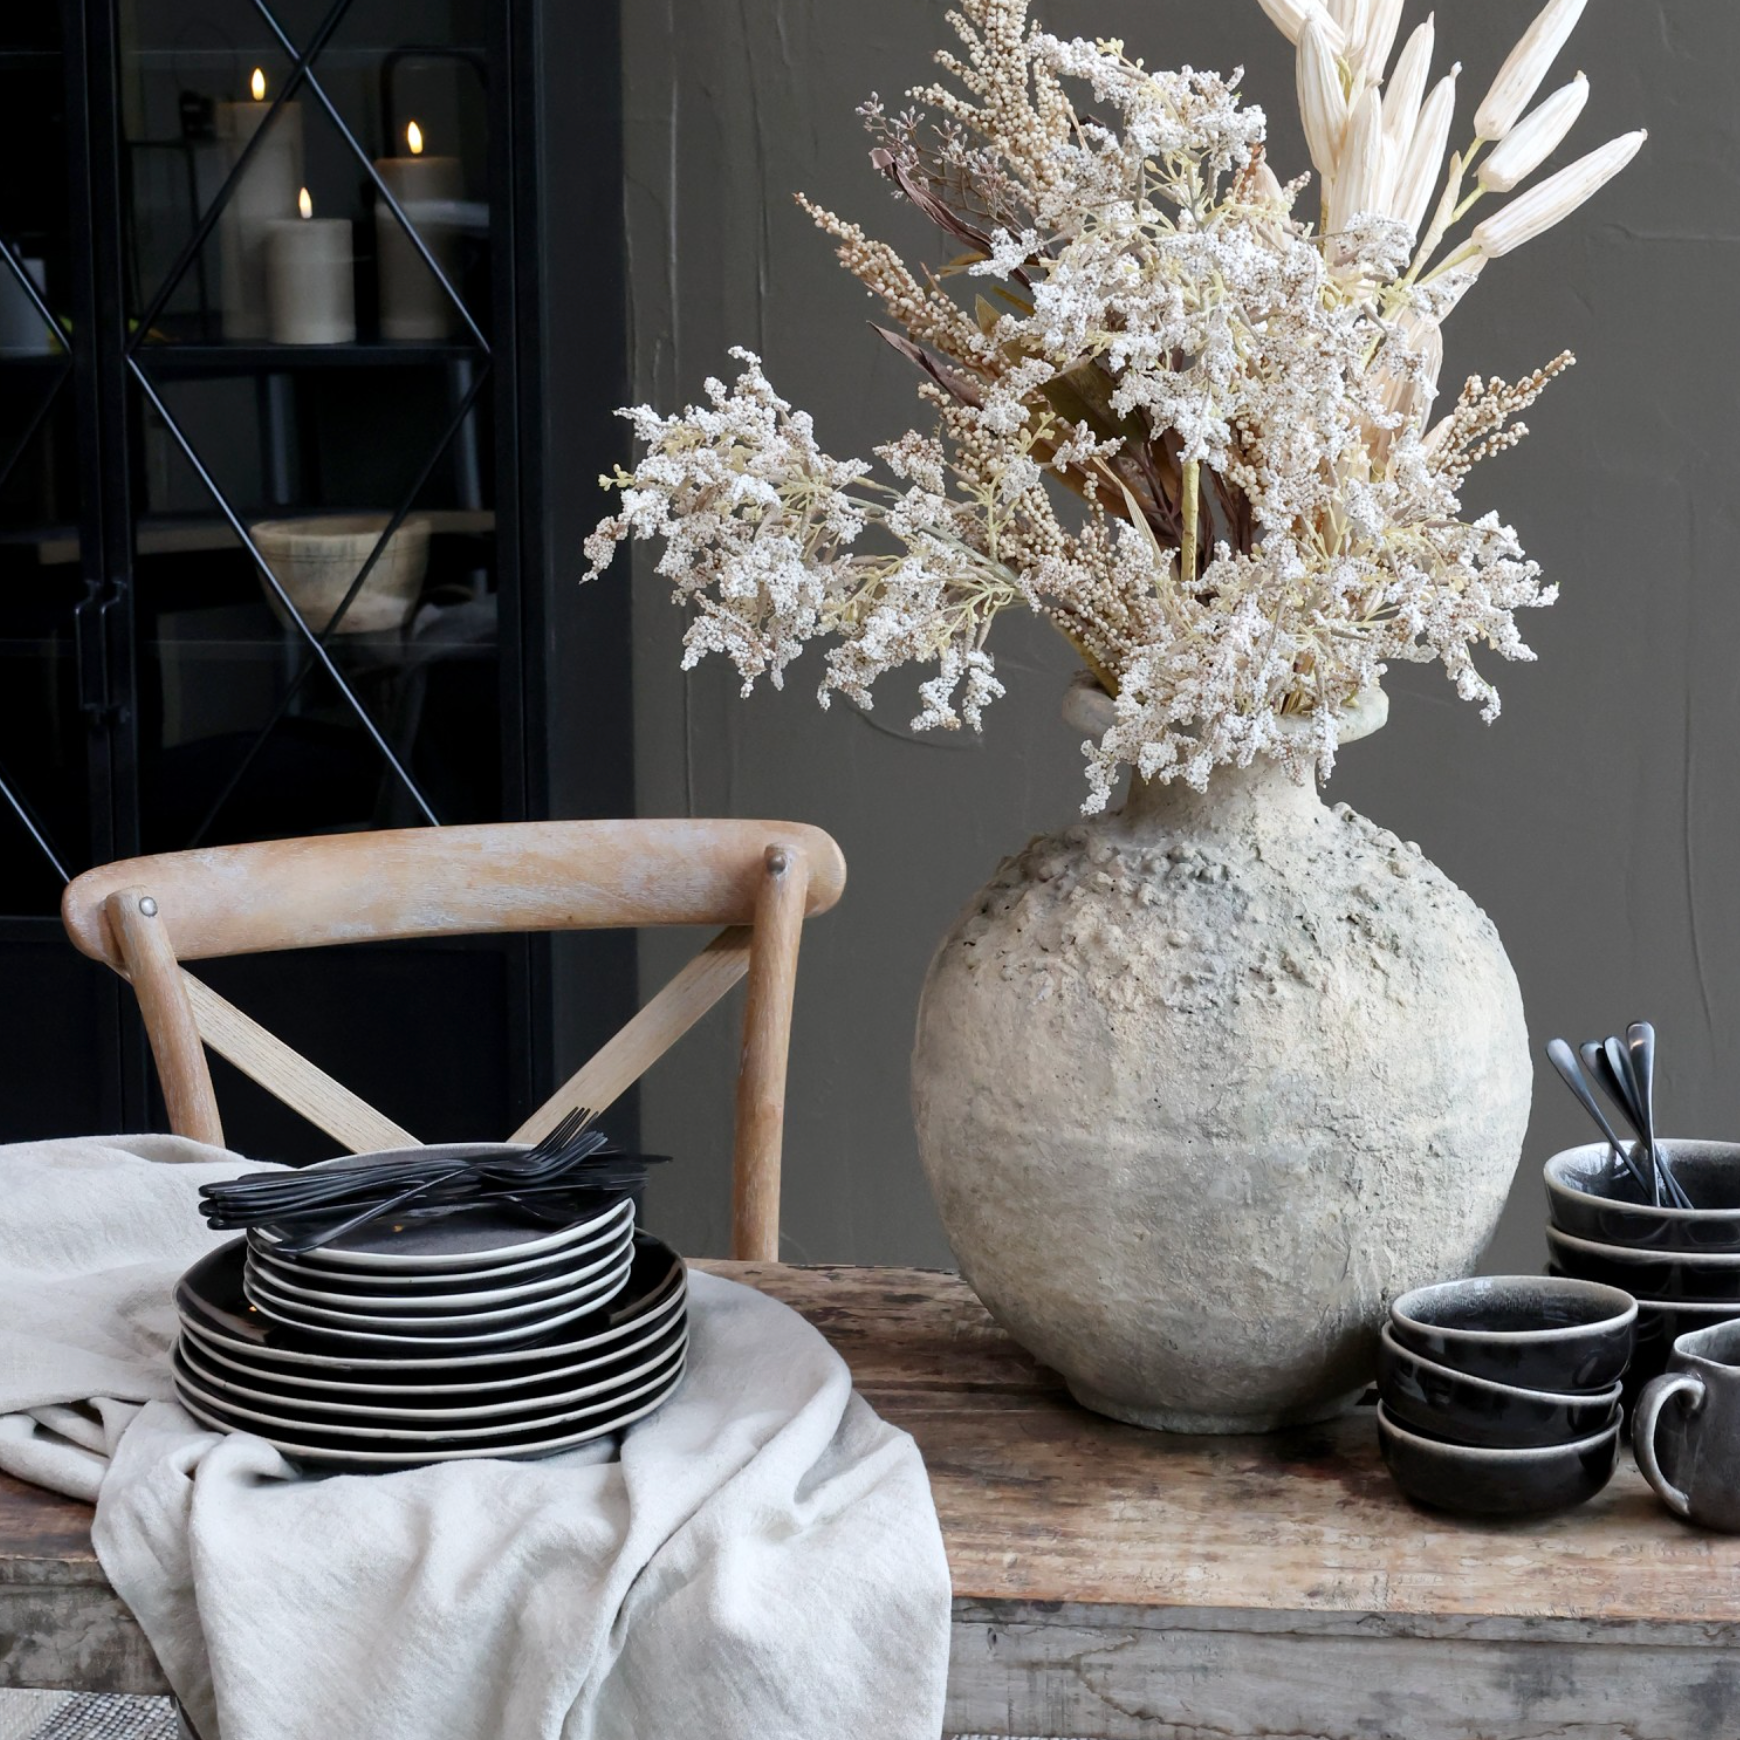 a dining table with a rustic vase with dried flowers, black crockery and a wooden dining chair.